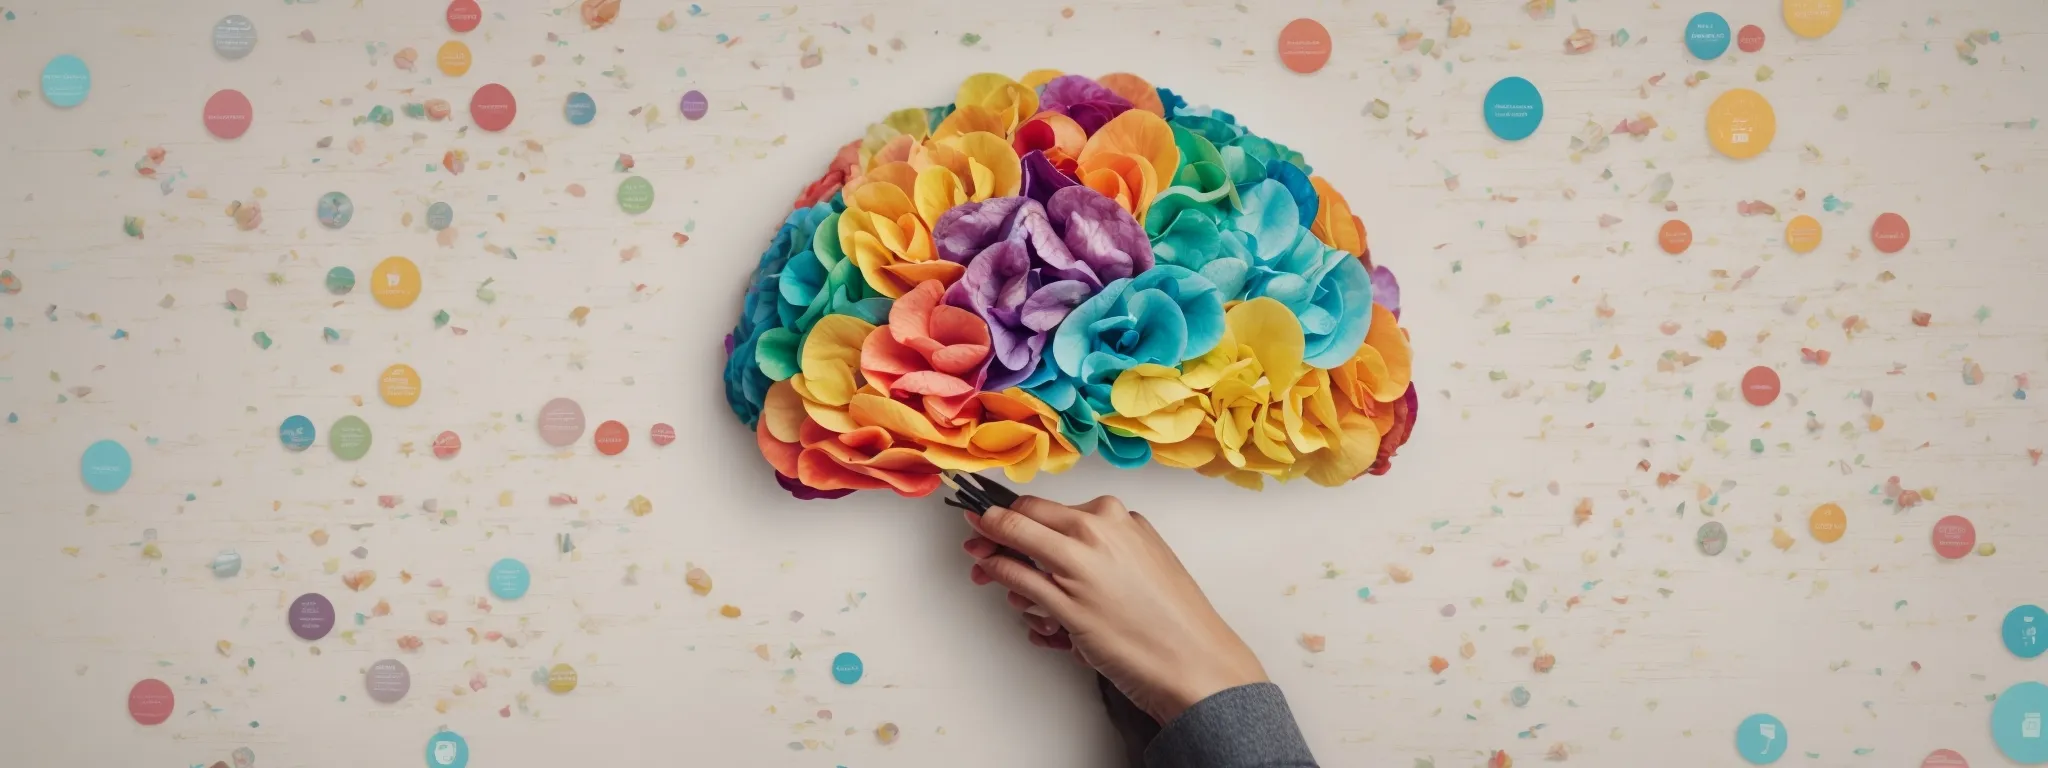 a marketer analyzes a colorful brain map that represents different consumer preferences and personality traits.